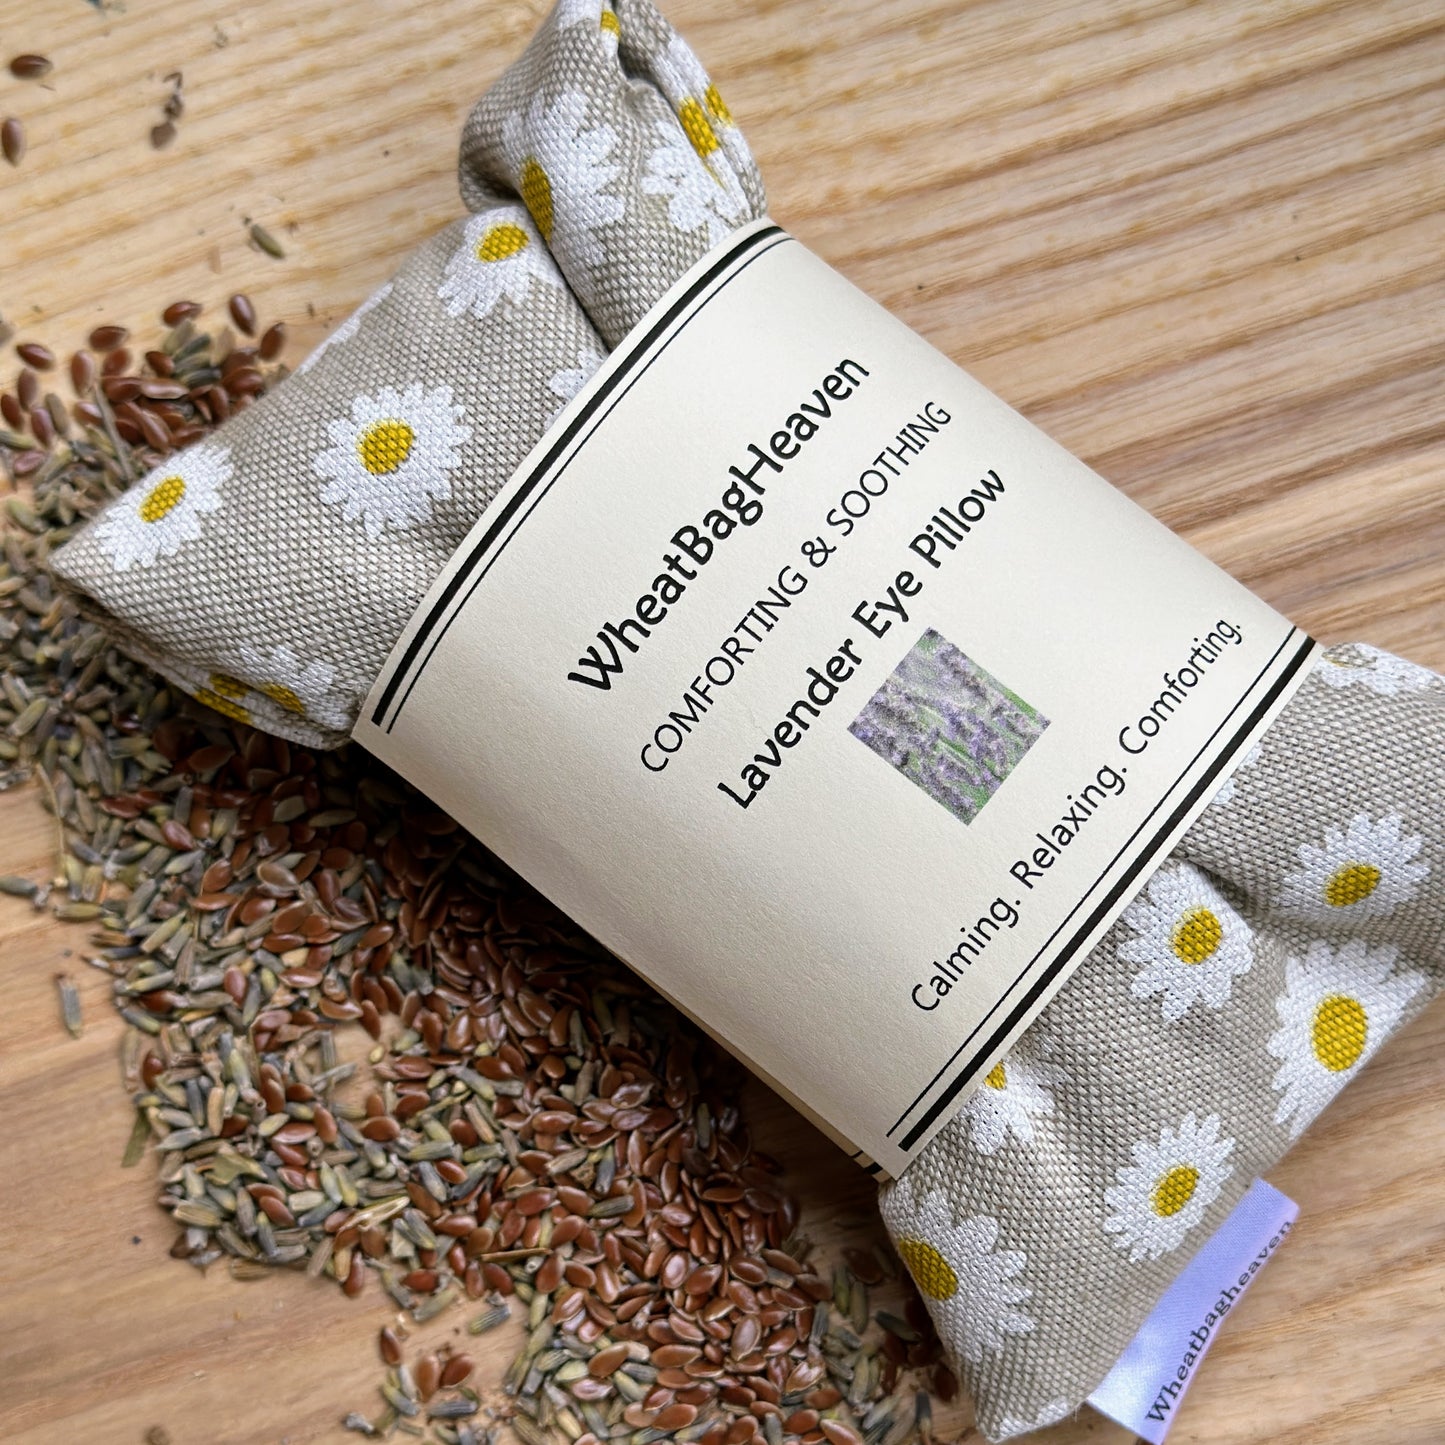 lovely eye pillow from wheat bag heaven with a daisy flower print, flax seed and lavender filling